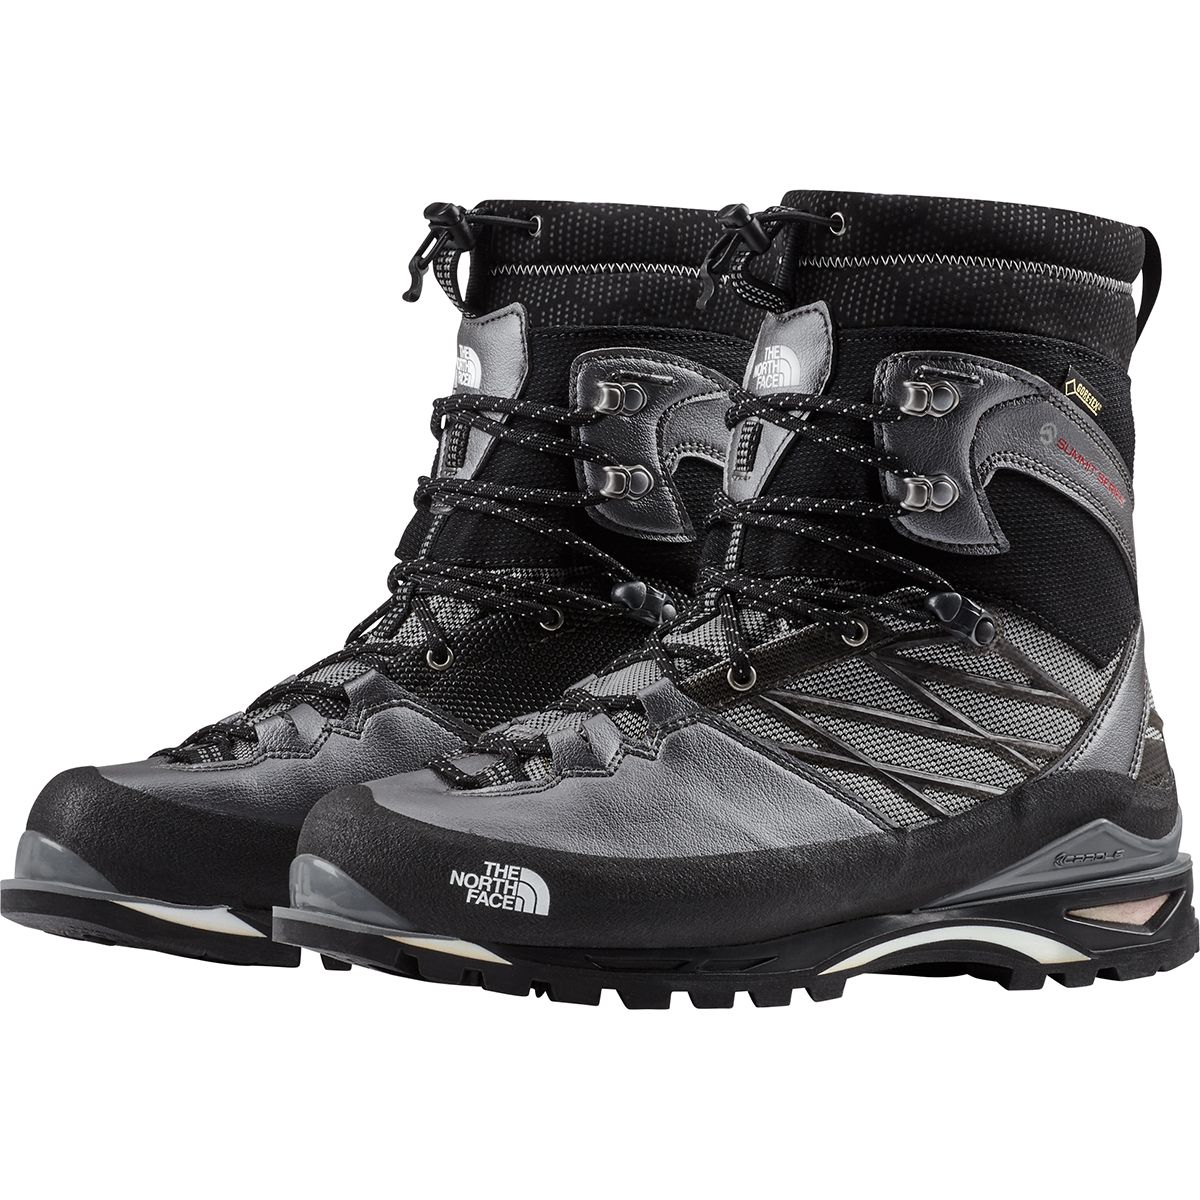 The North Face Verto S4K Ice GTX Boot